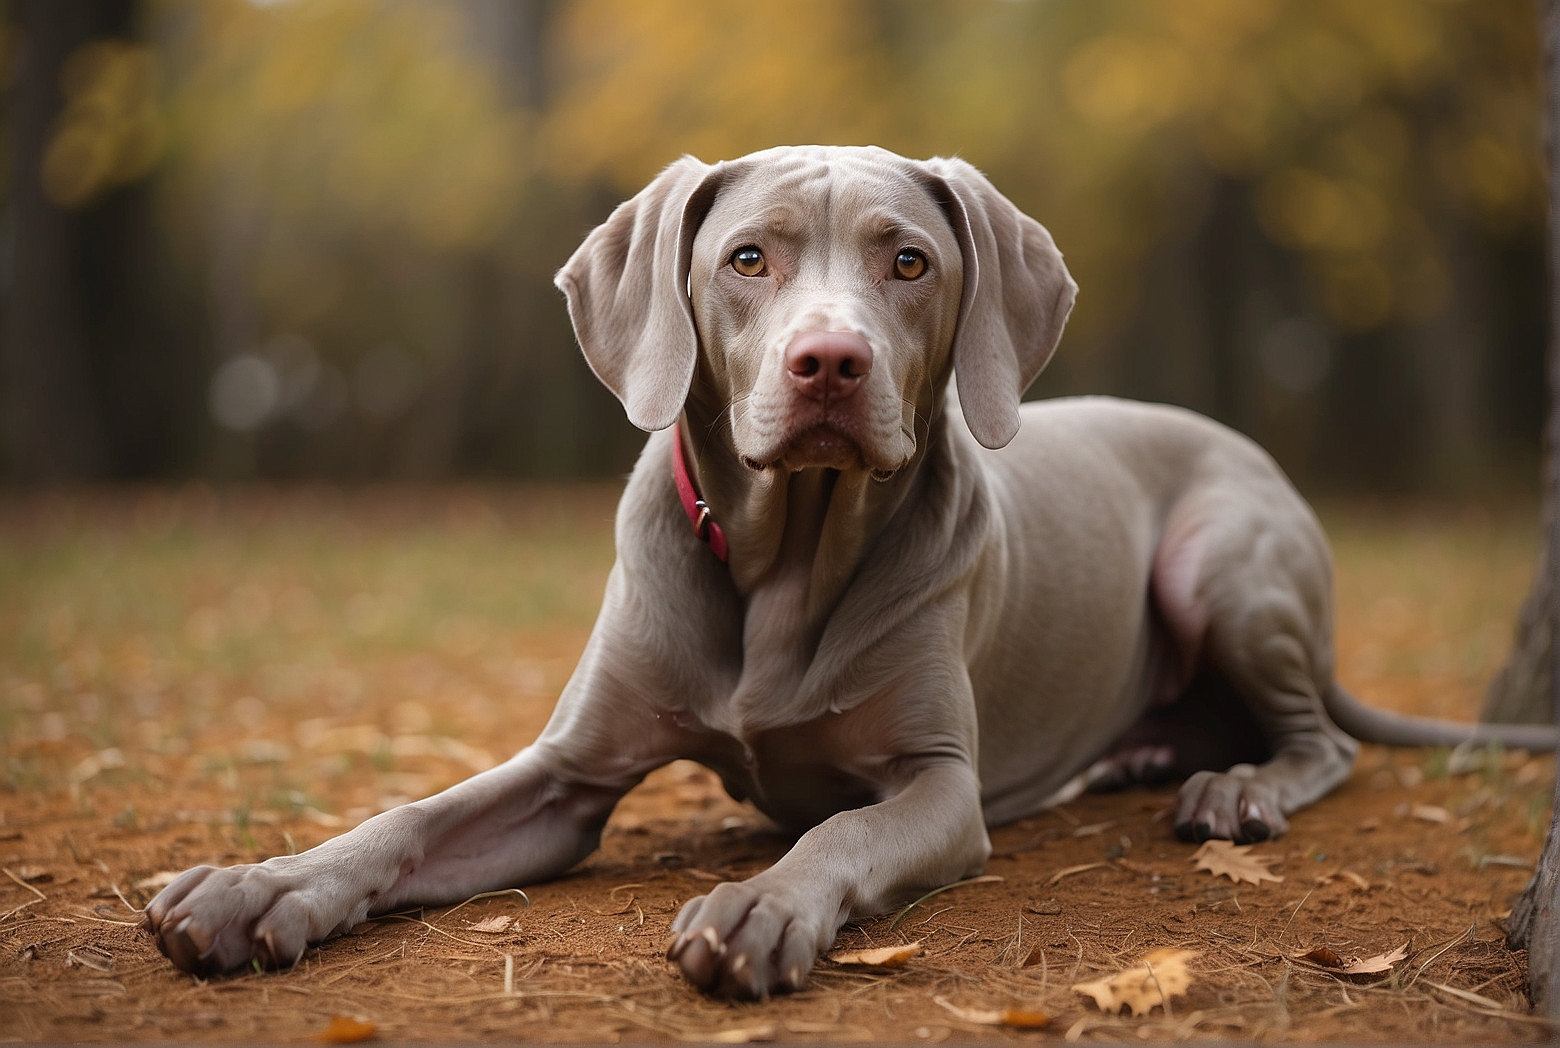 How Long Does a Weimaraner Live?